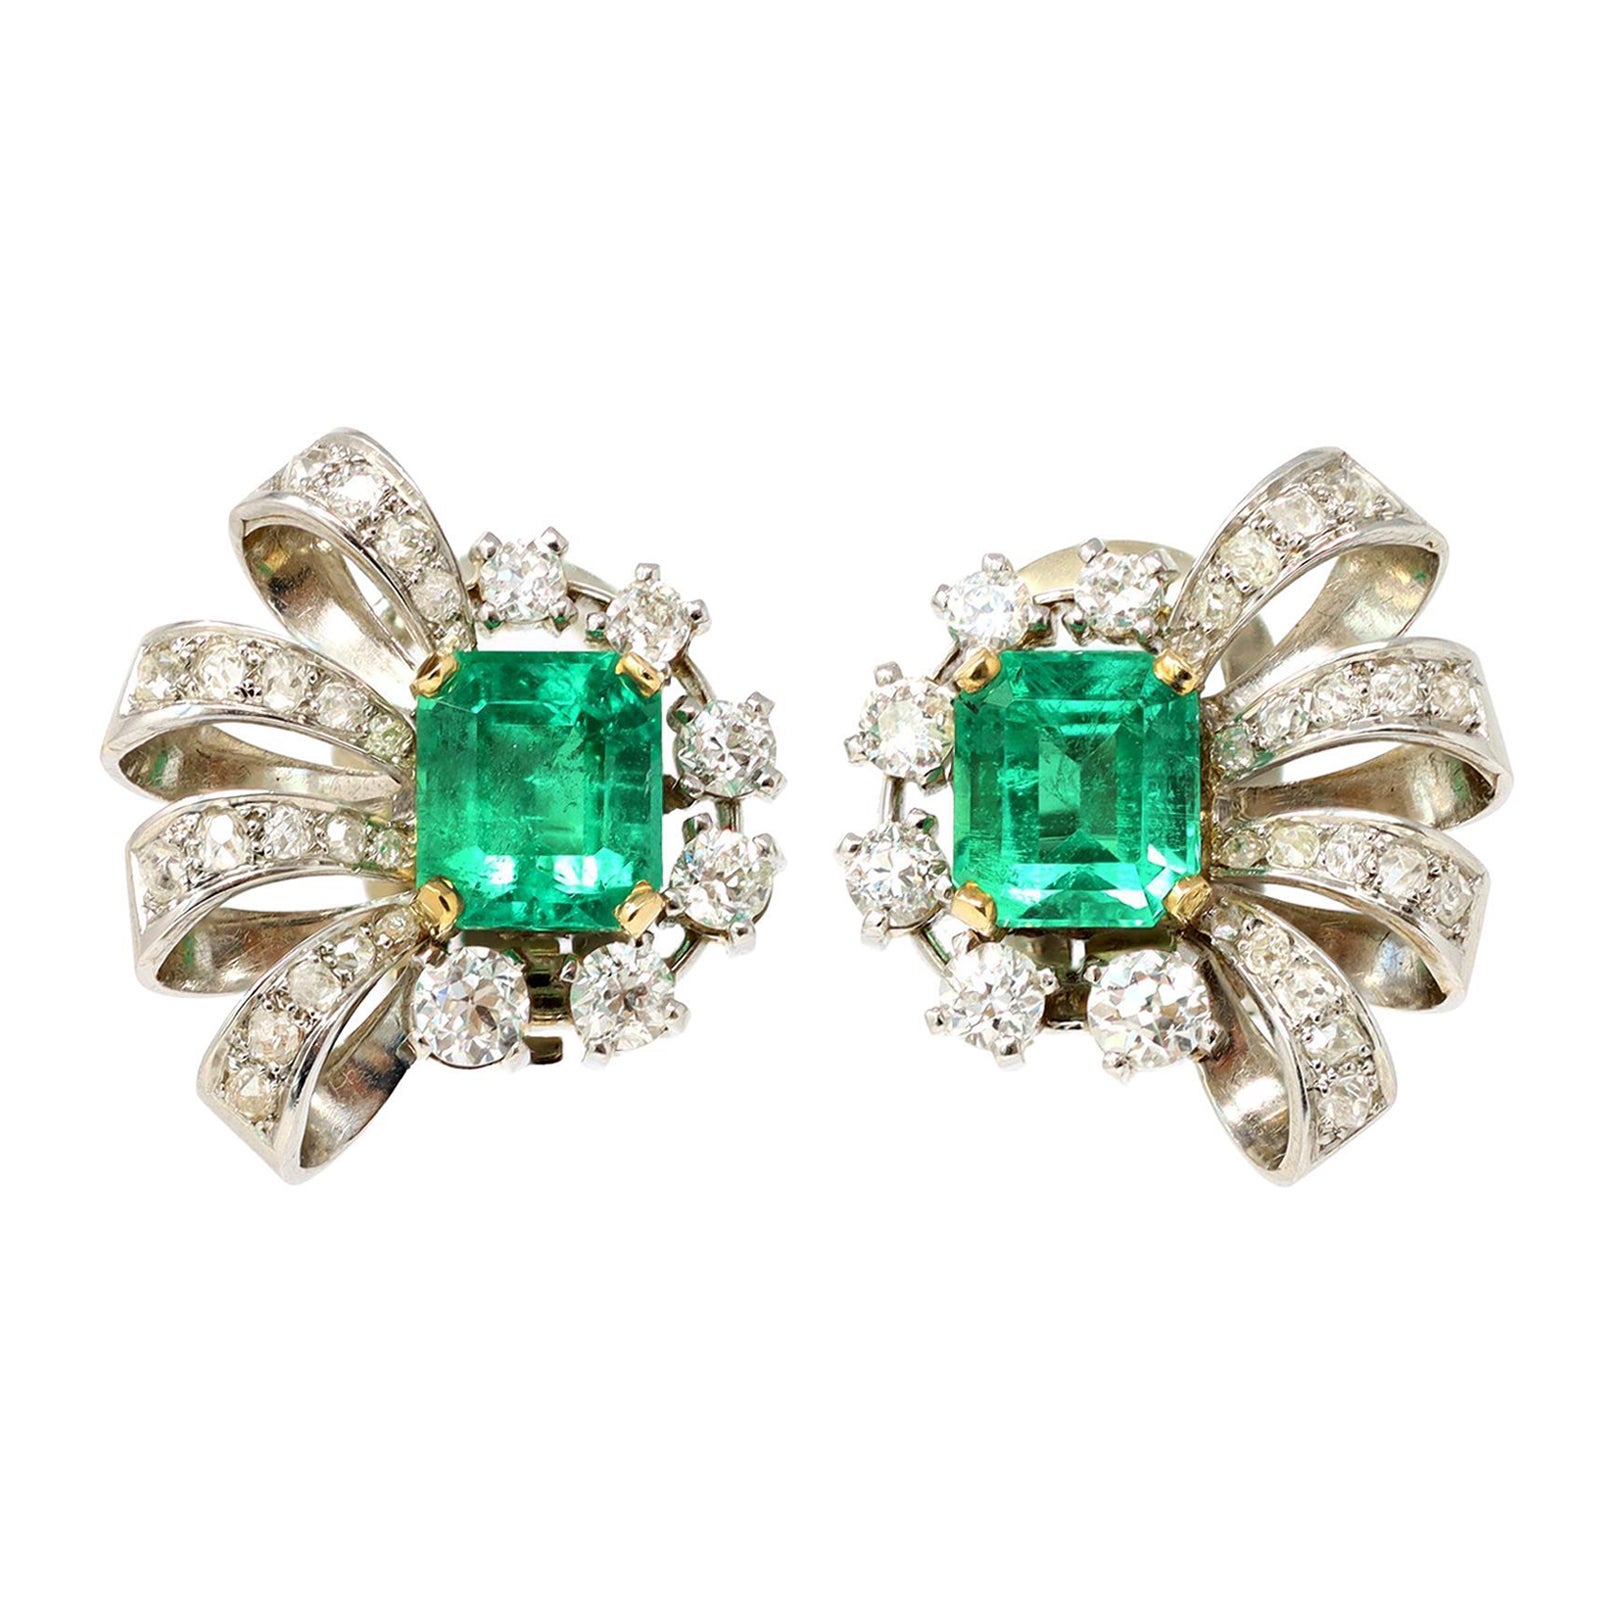 Pair of Emerald and Diamond Clip on Earrings in Platinum, Circa 1940